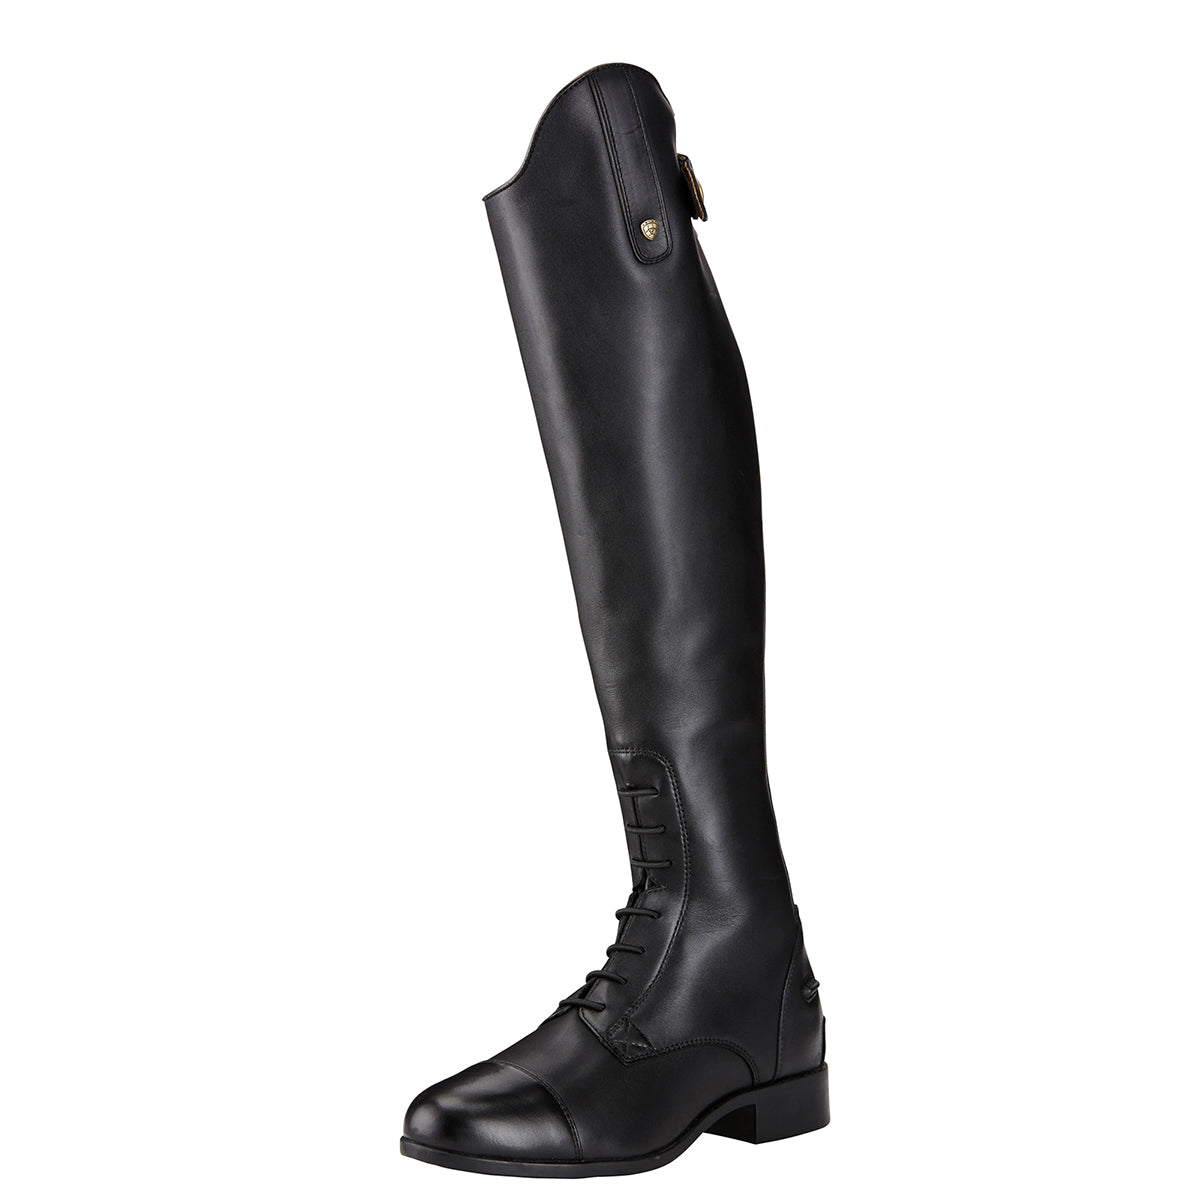 Women's Ariat Heritage Contour II Field Zip Tall Riding Boot in Black from the front